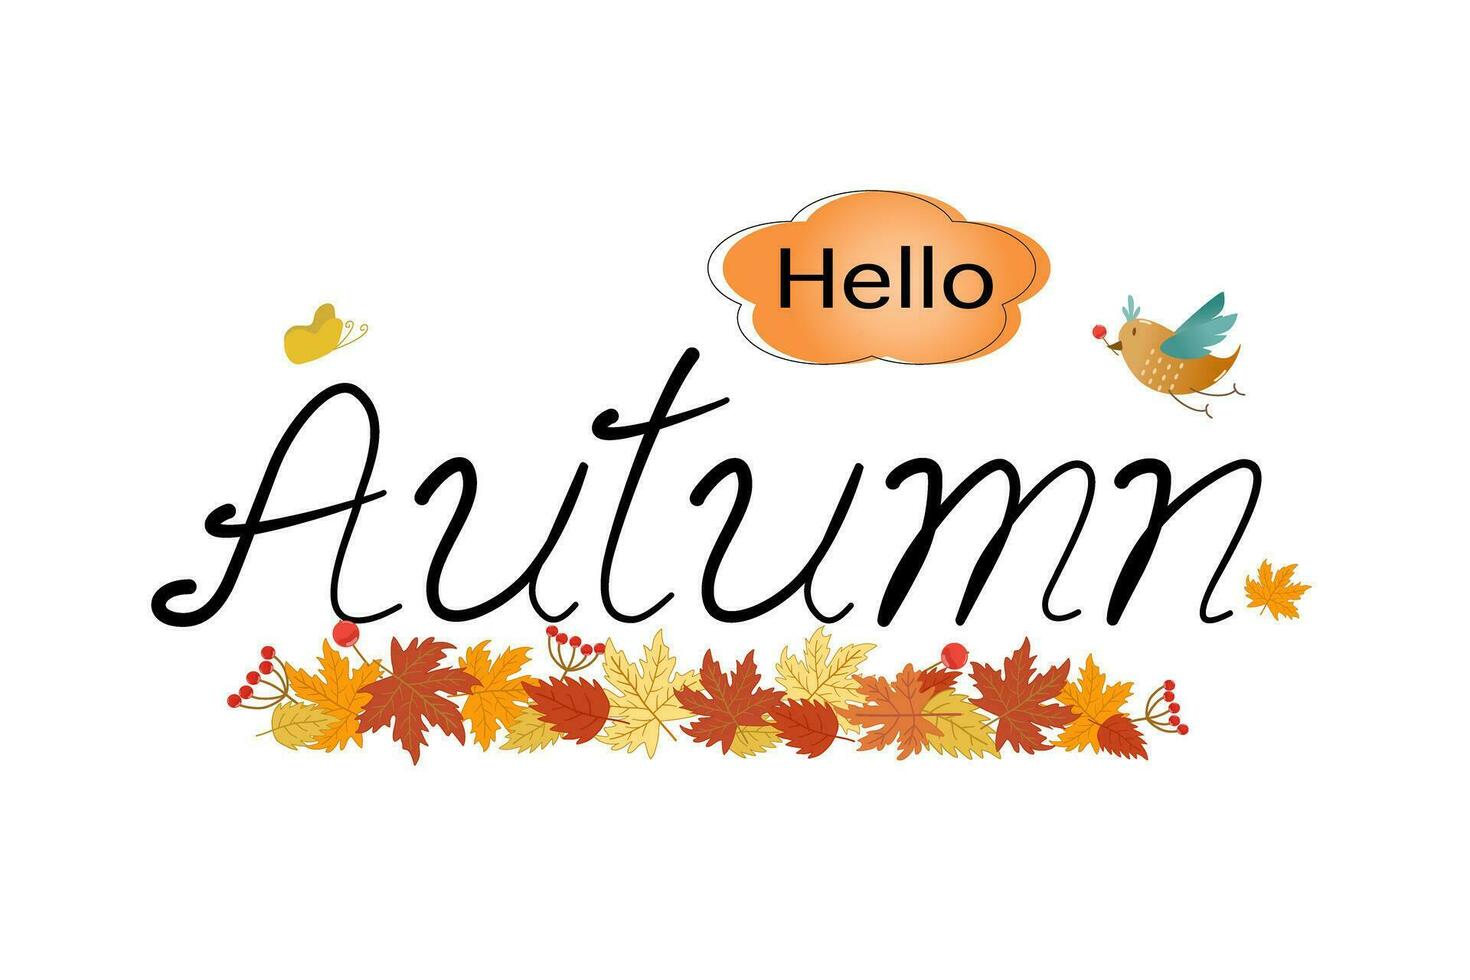 Vector - Hello Autumn with many maple leaves, butterfly and bird.